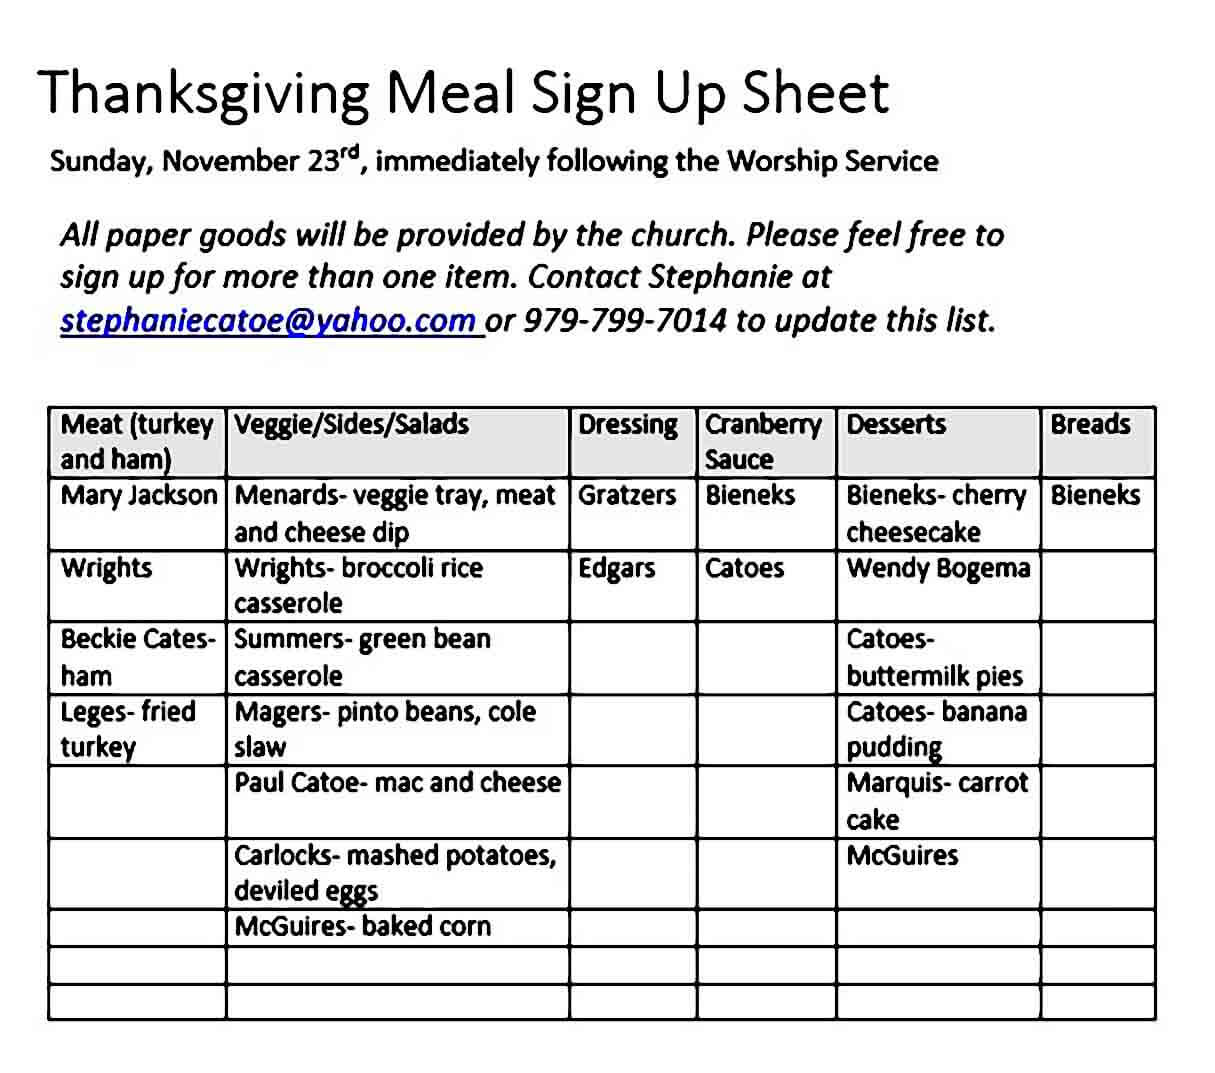 Thanksgiving Meal Sign Up Sheet templates